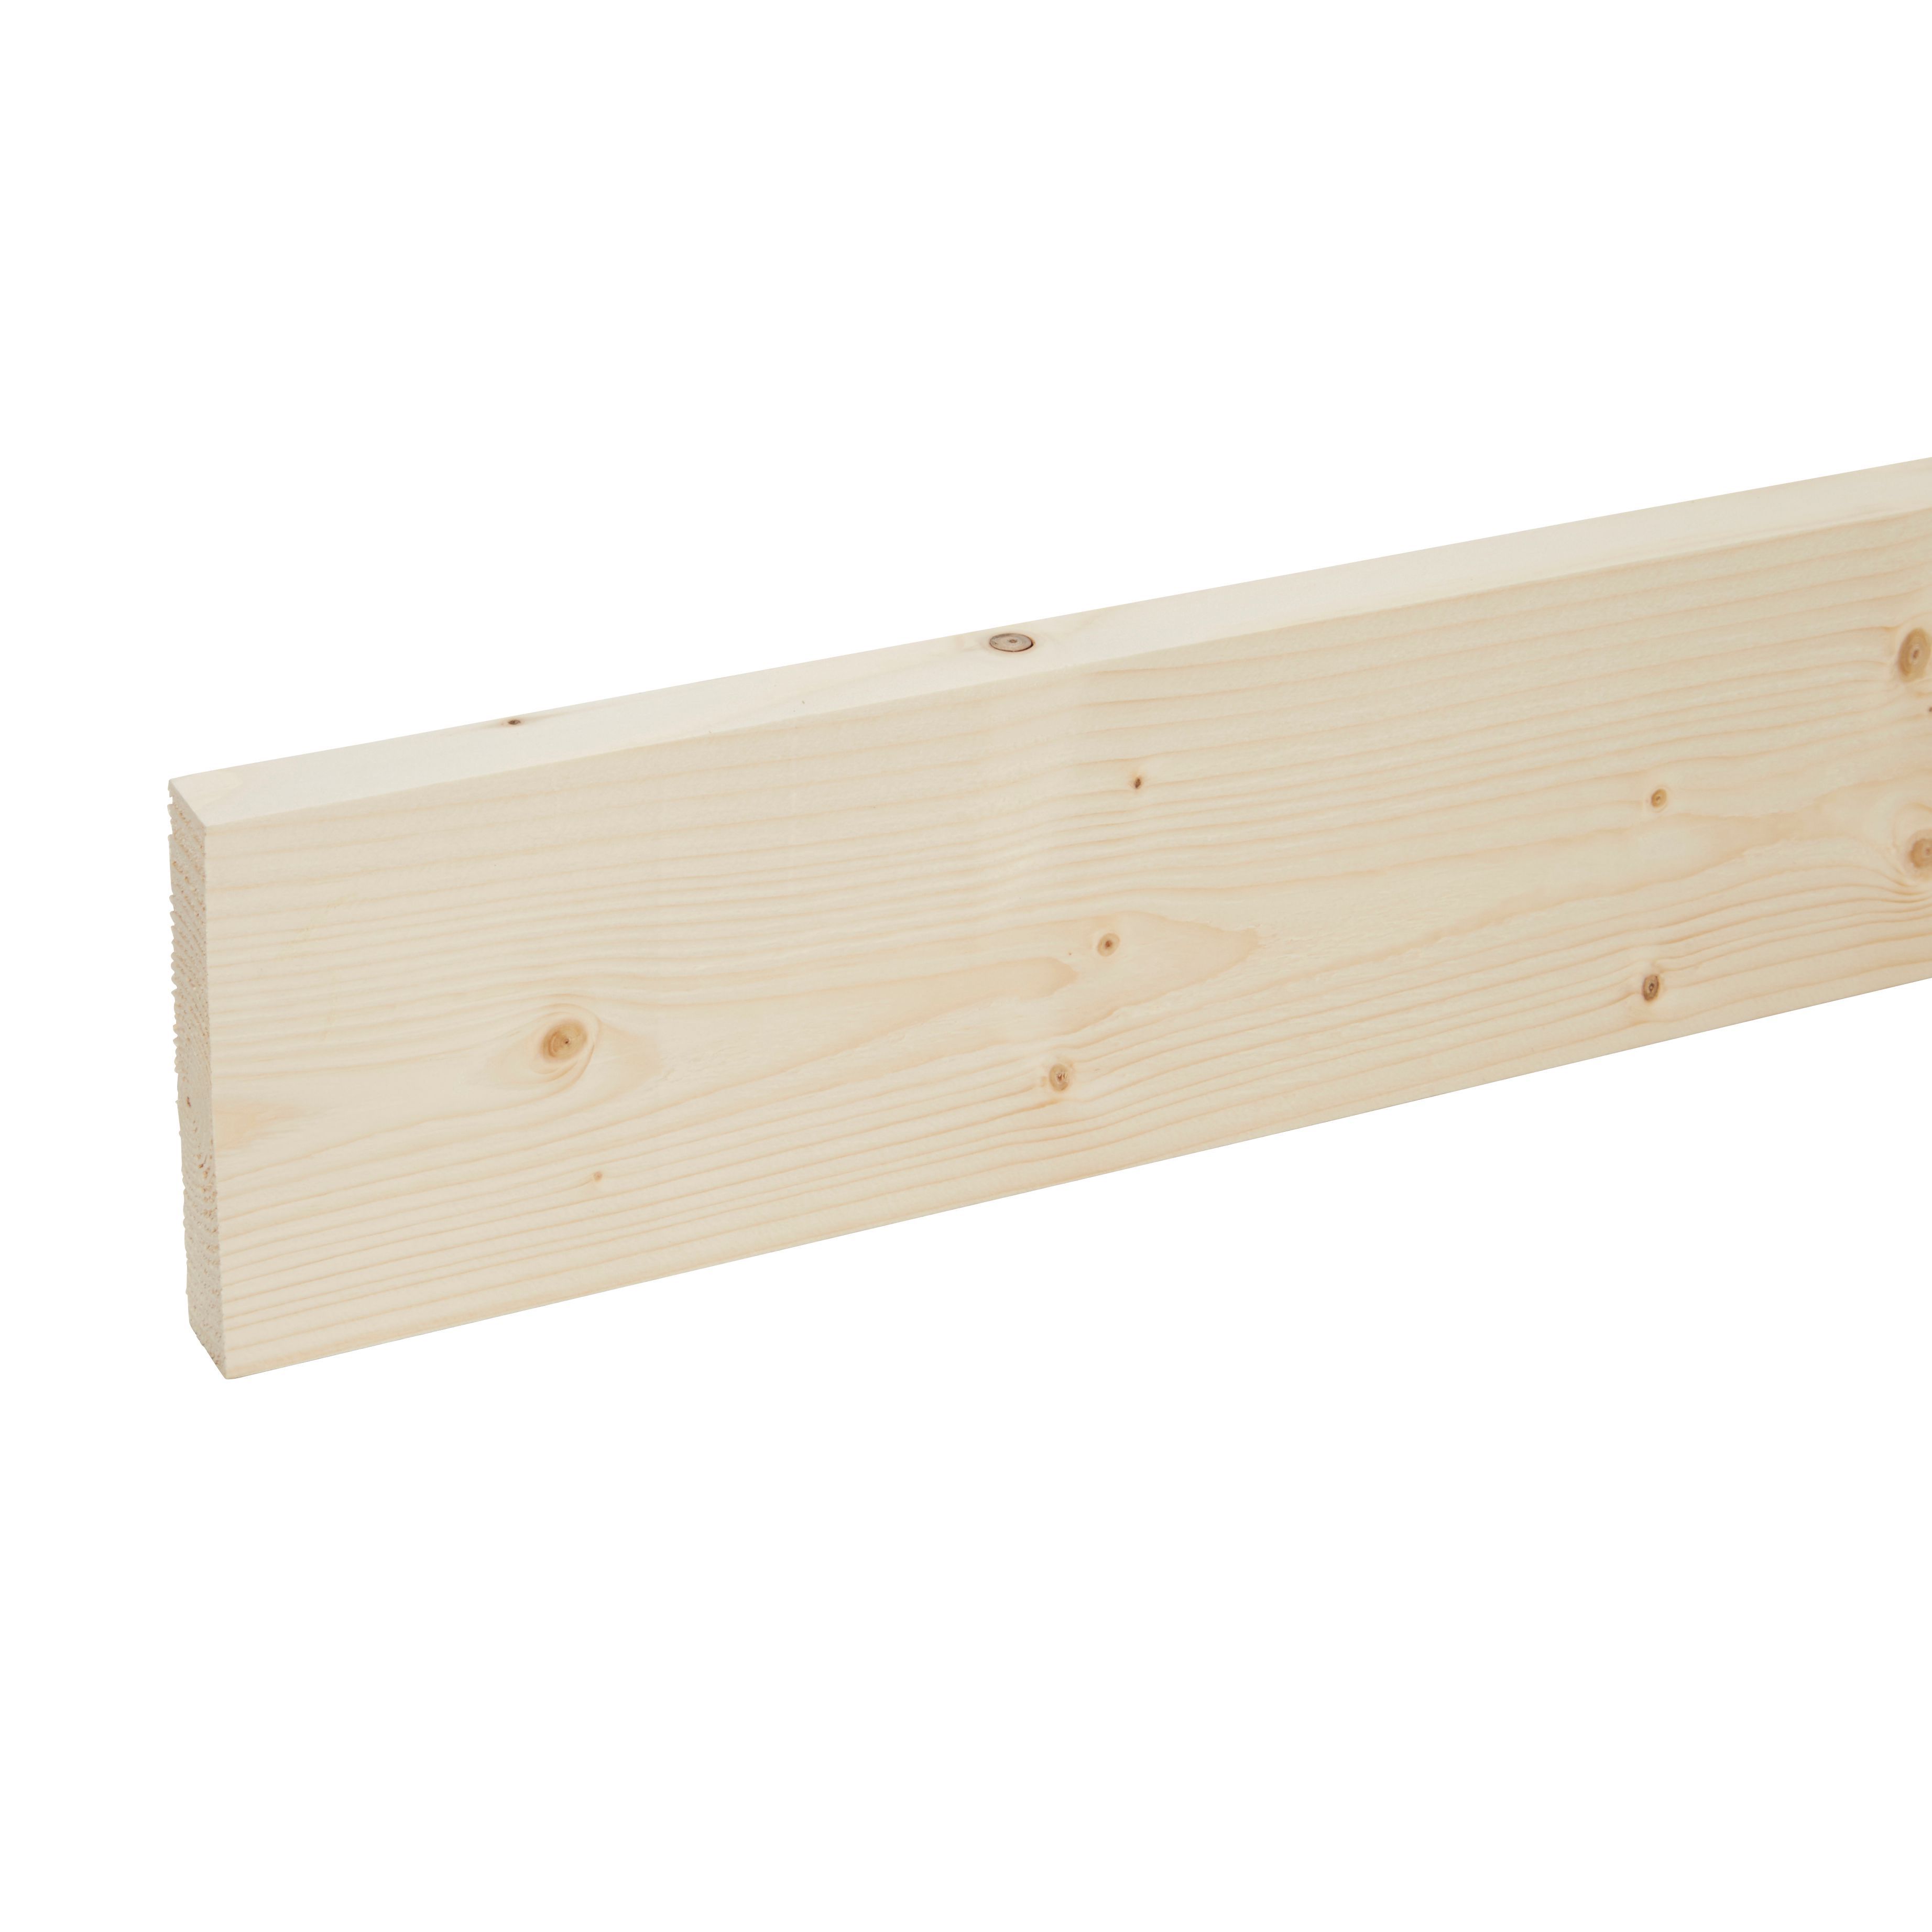 Smooth Planed Square edge Whitewood spruce Stick timber (L)2.4m (W)94mm (T)18mm S4SW07P, Pack of 4